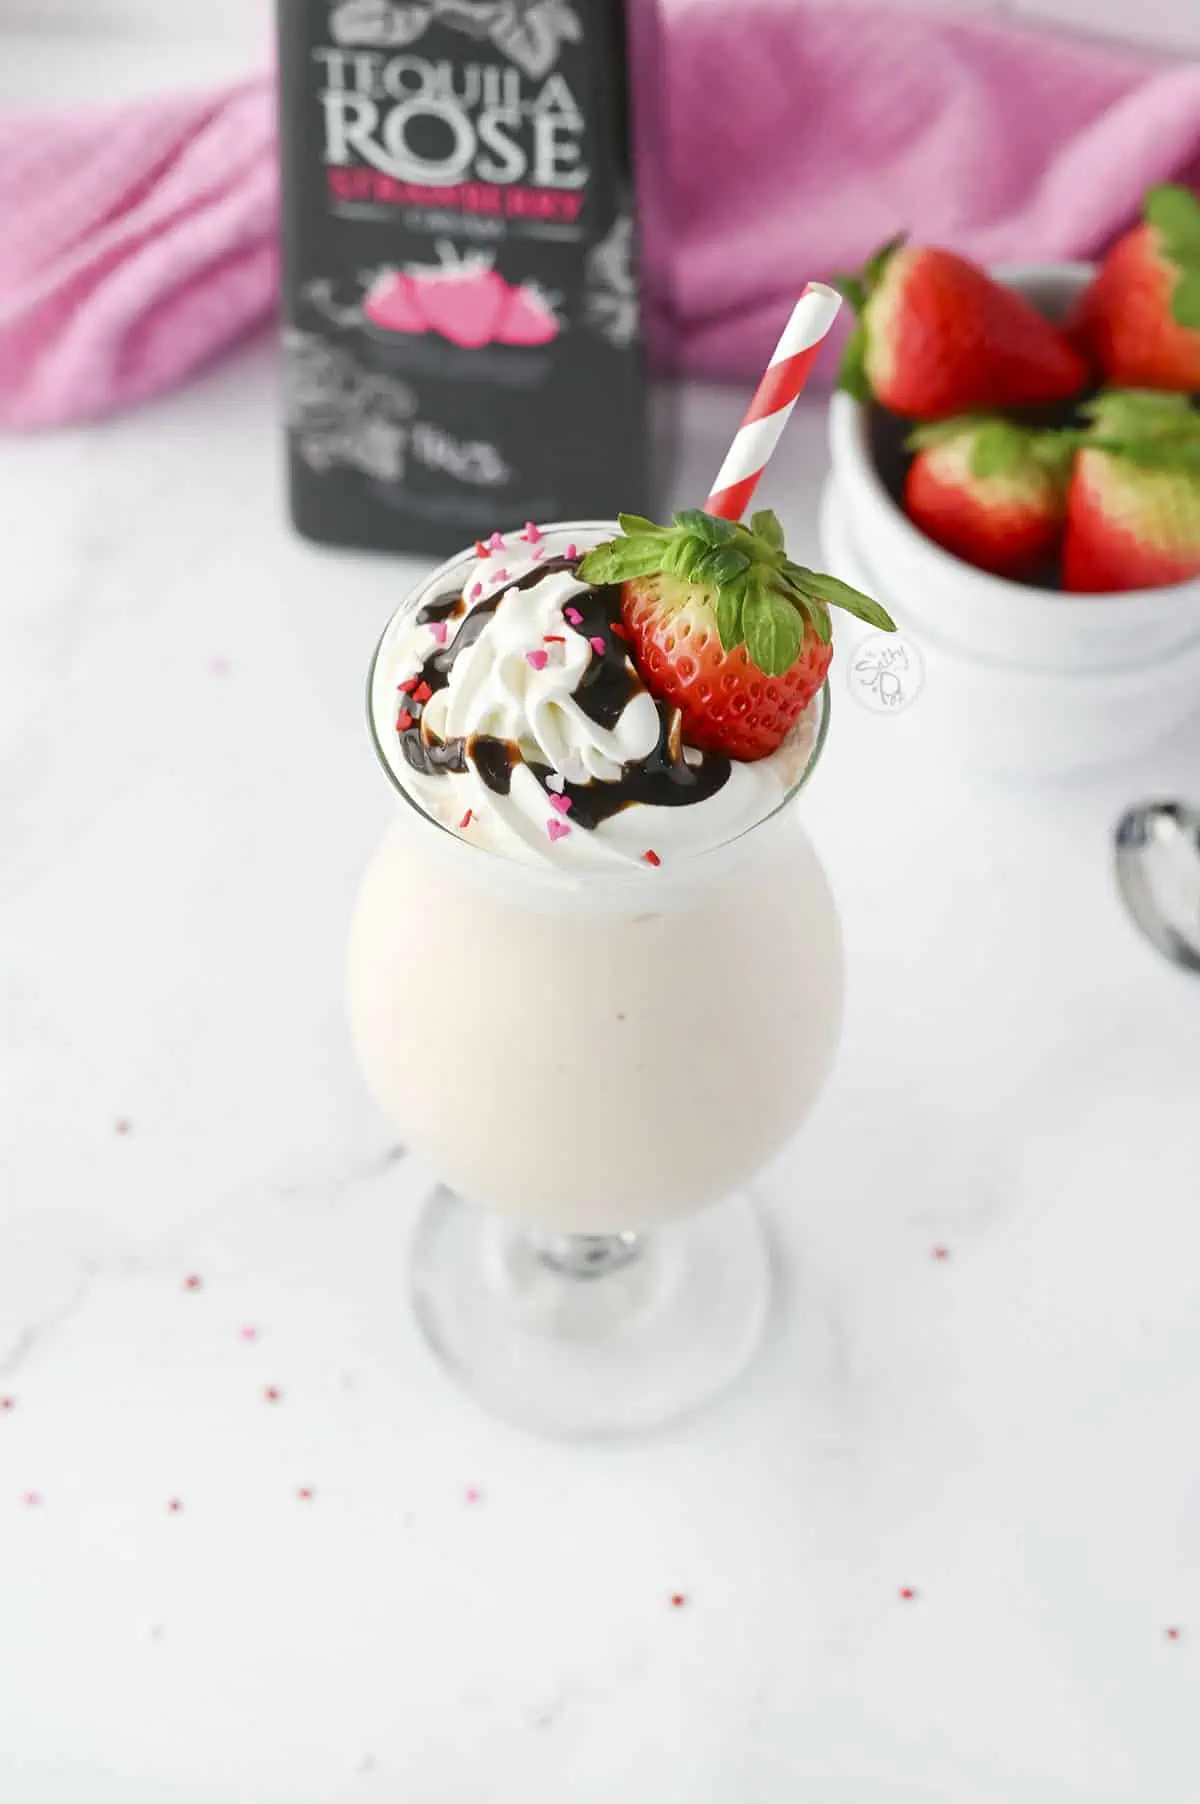 Tequila rose cocktail with a topping of whipped cream, chocolate syrup, and a fresh strawberry, and straw.